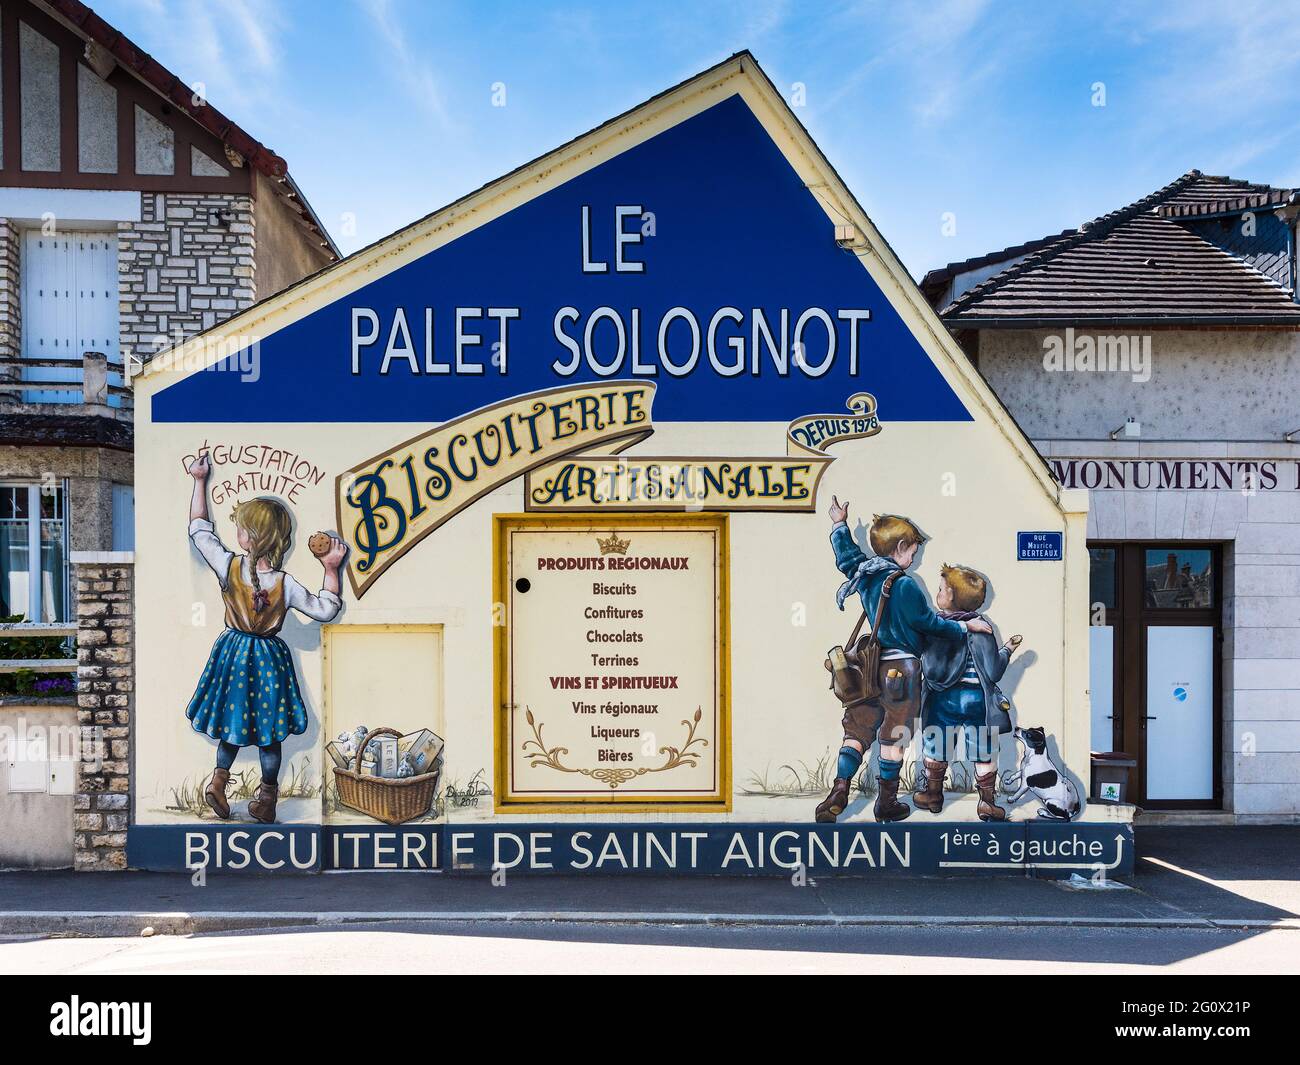 Wall decoration / advertising mural for 'Le Palet Solognot' local biscuits - Saint-Aignan, Loir-et-Cher (41), France. Stock Photo